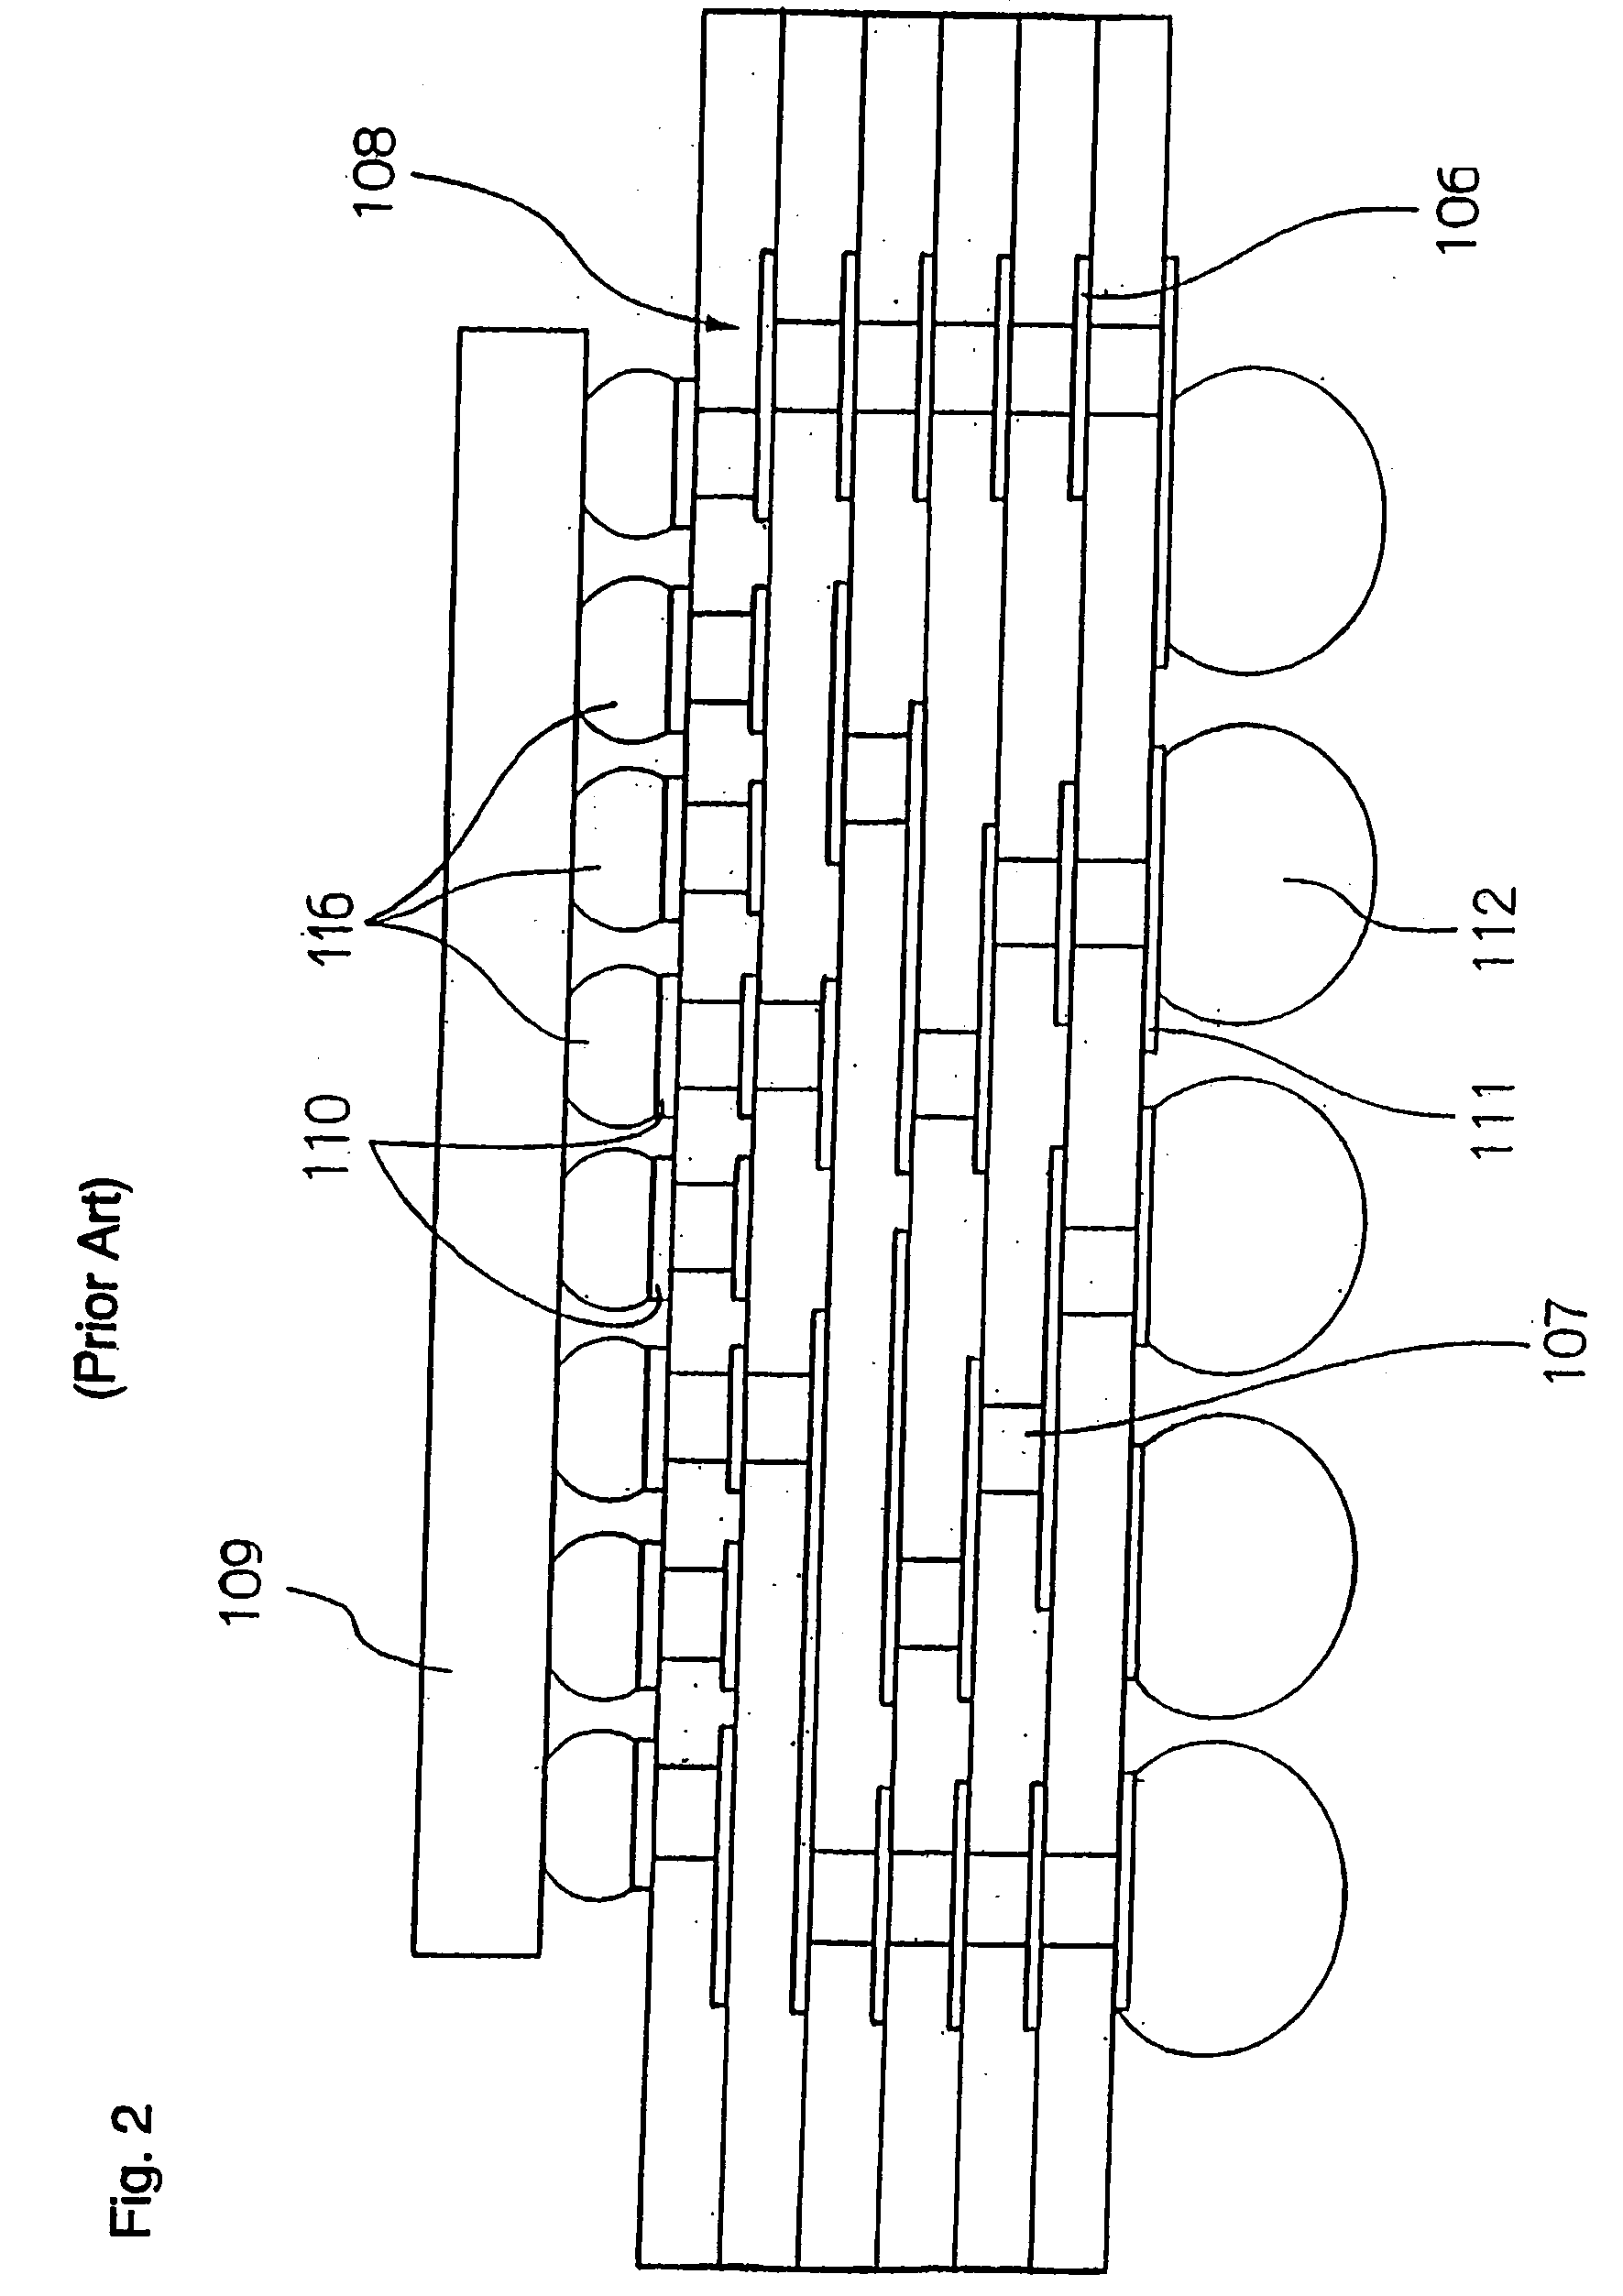 Package substrate for a semiconductor device, a fabrication method for same, and a semiconductor device